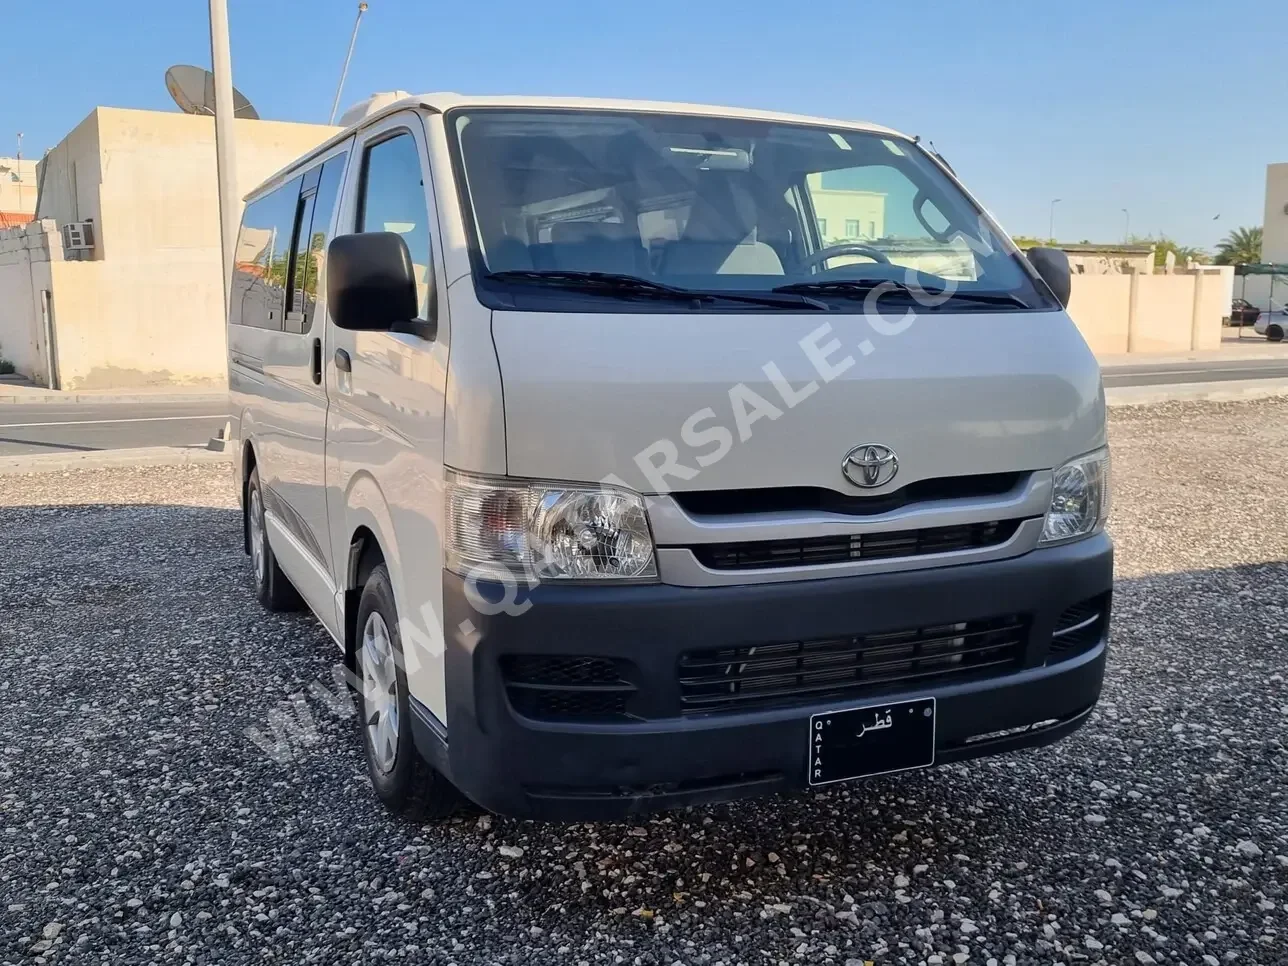 Toyota  Hiace  2010  Manual  26,000 Km  4 Cylinder  Front Wheel Drive (FWD)  Van / Bus  White